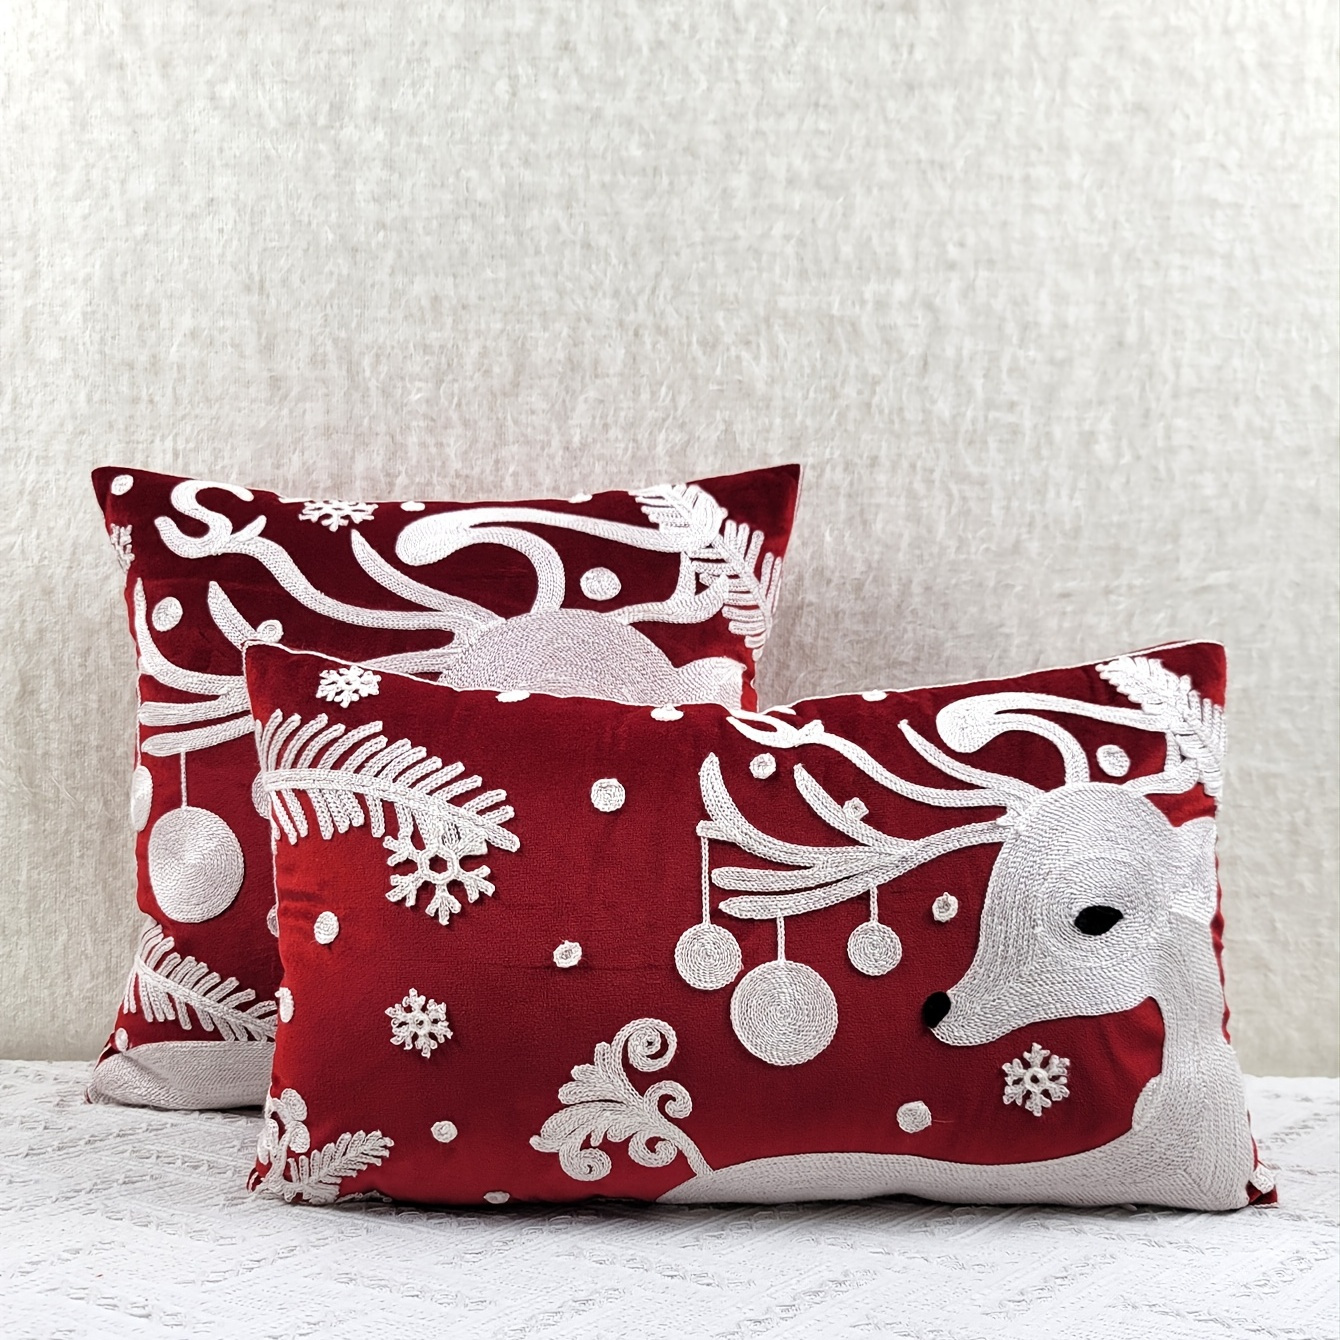 Handmade Christmas Pillow Cover in Hand Felted Wool - Red Reindeer on Gray  - 12x24 - Pillow Cover in 2023